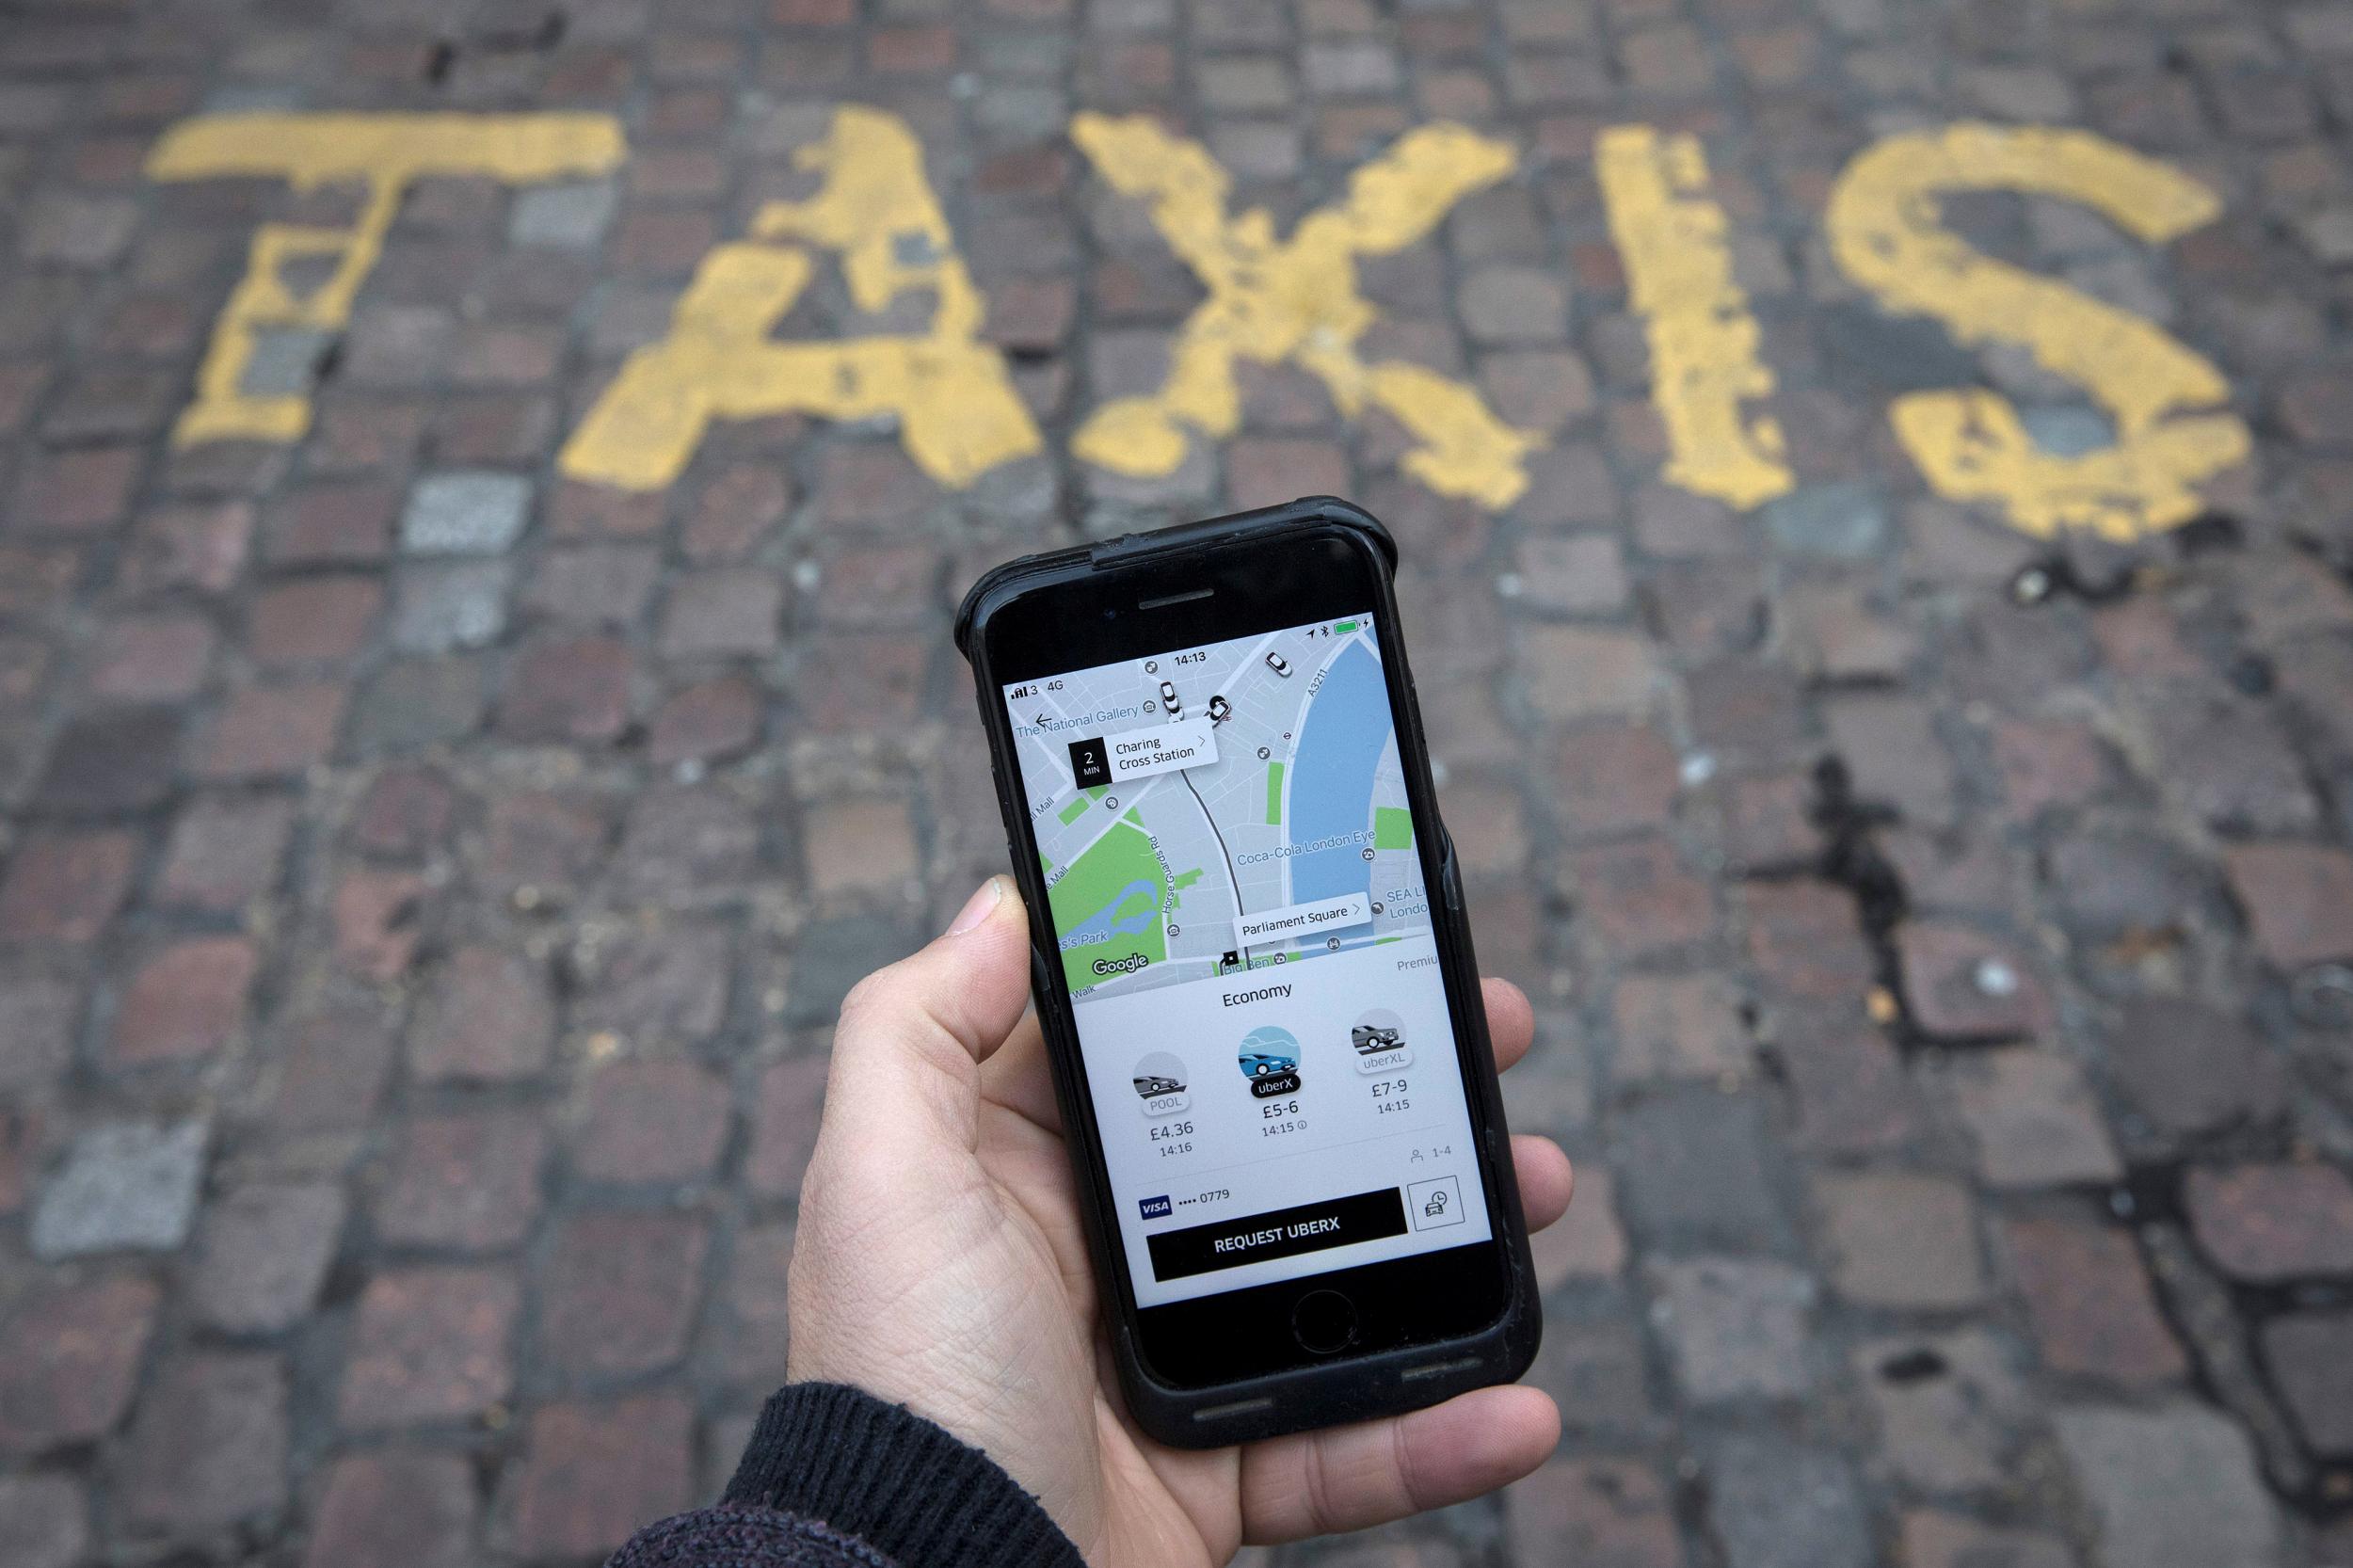 Uber is currently fighting a legal battle in the UK over its classification of drivers and couriers as independent contractors